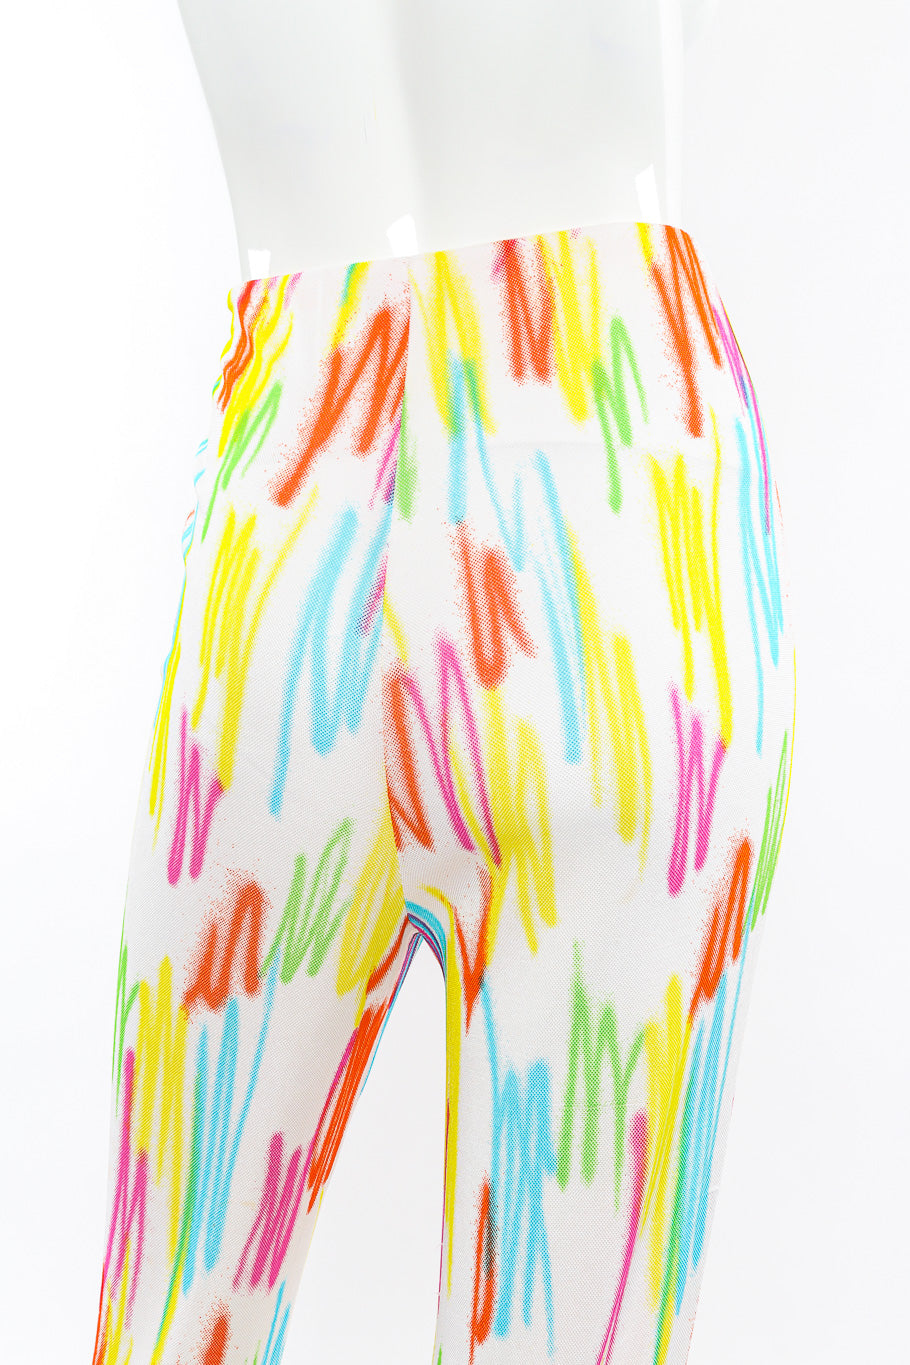 Vintage Gianni Versace 1996 SS Neon Scribble Top and Pant Set back view of pant waist on mannequin closeup @Recessla